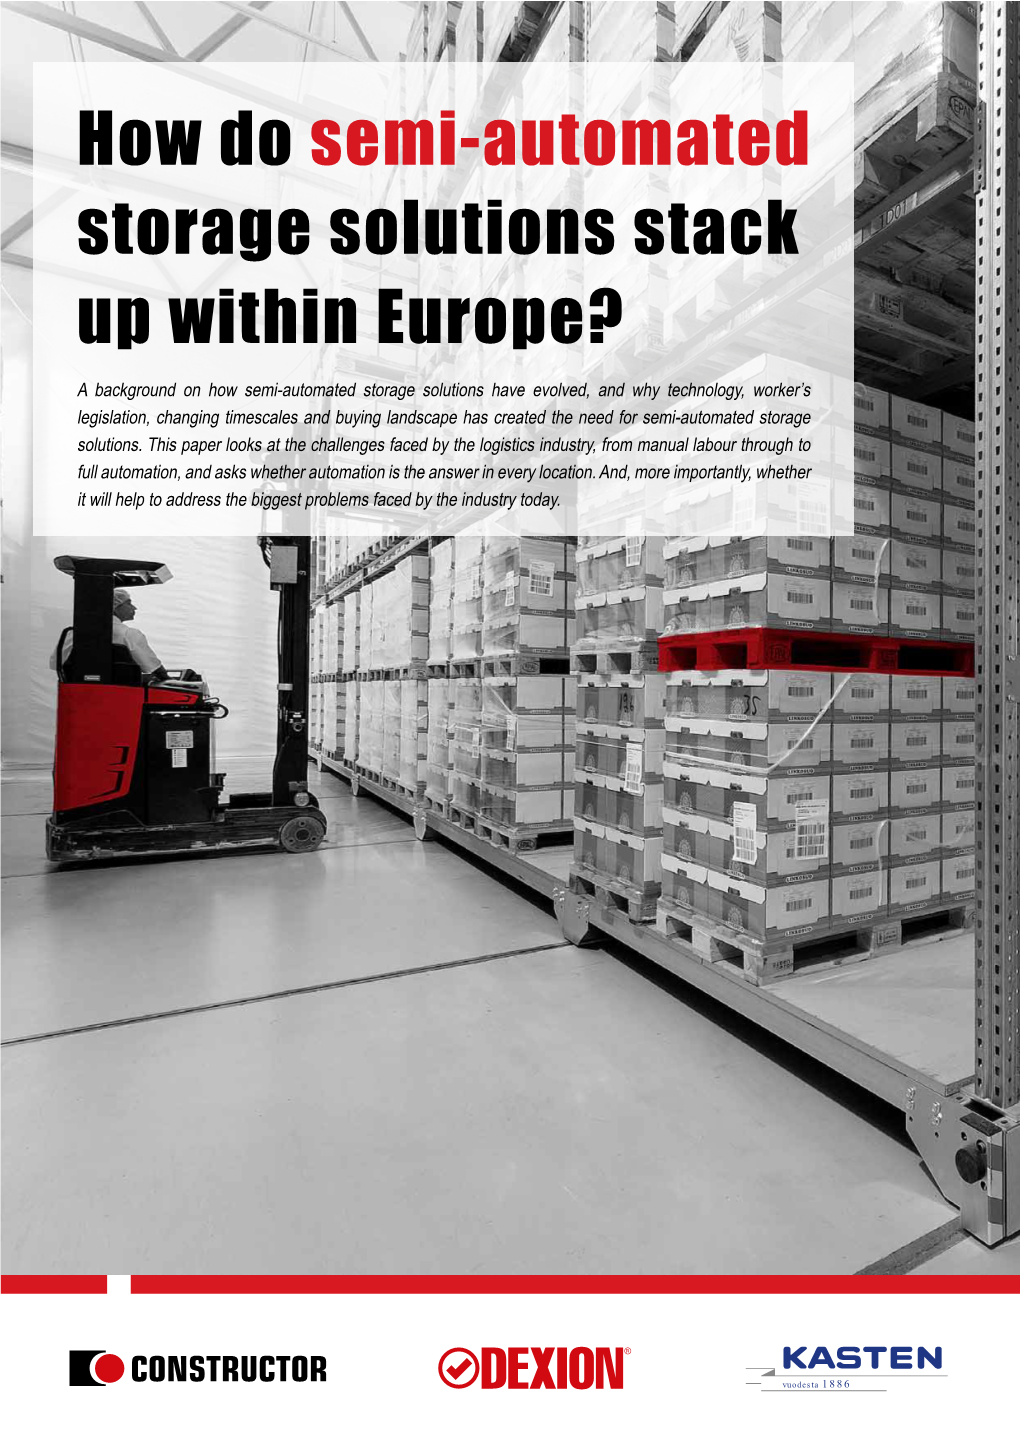 How Do Semi-Automated Storage Solutions Stack up Within Europe?